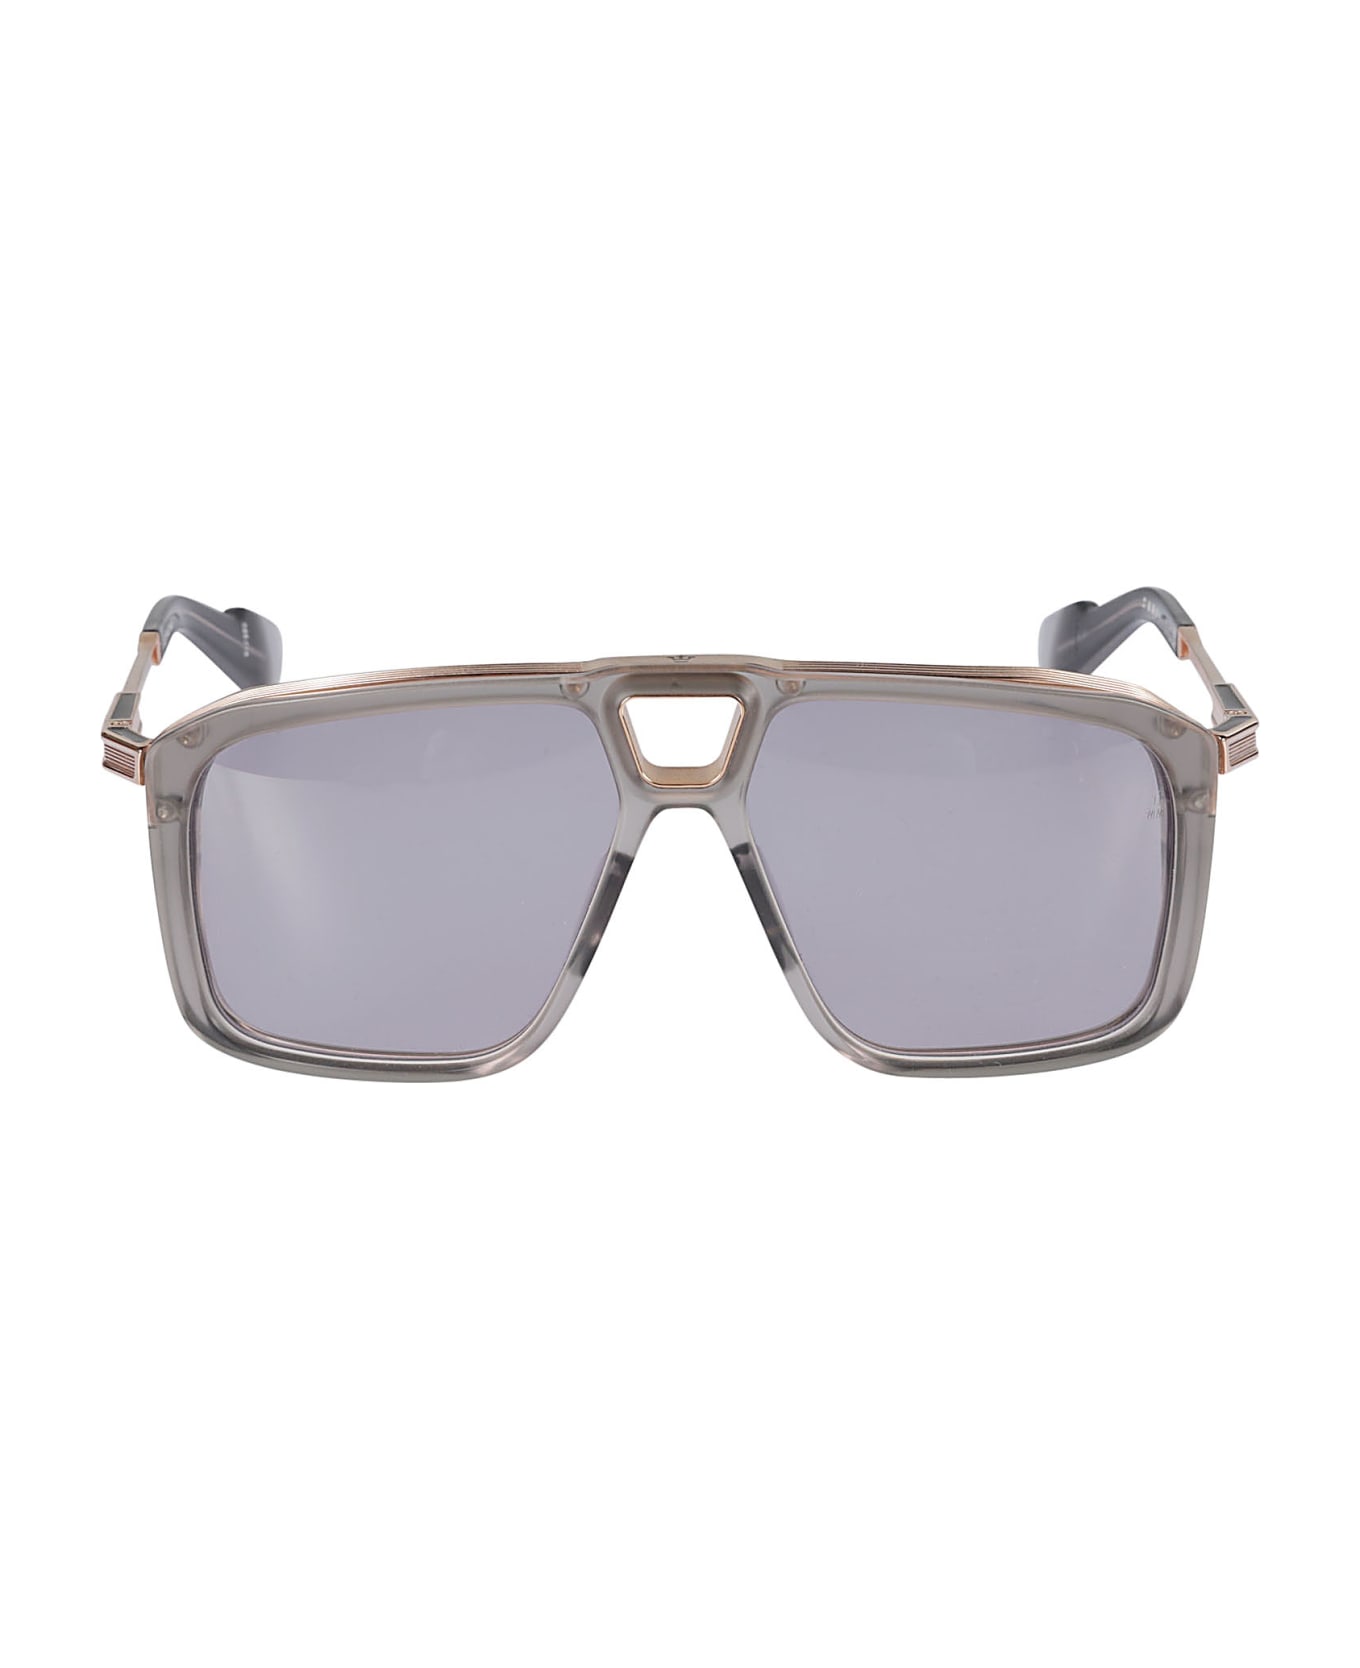 Jacques Marie Mage Savoy Sunglasses - Charcoal